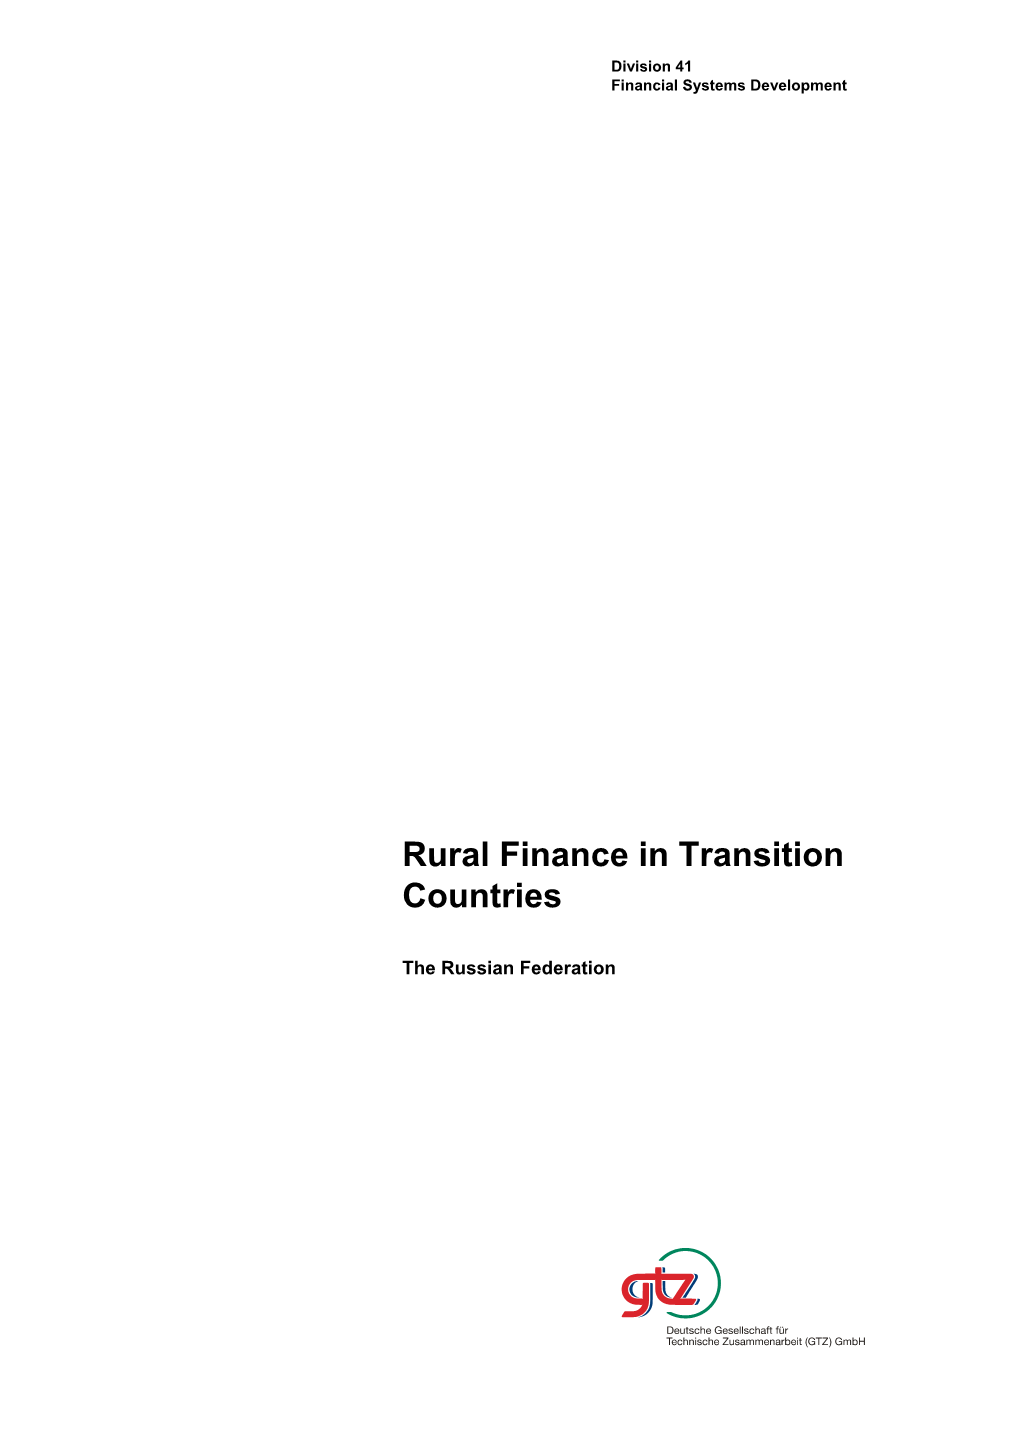 Rural Finance in Transition Countries: the Russian Federation